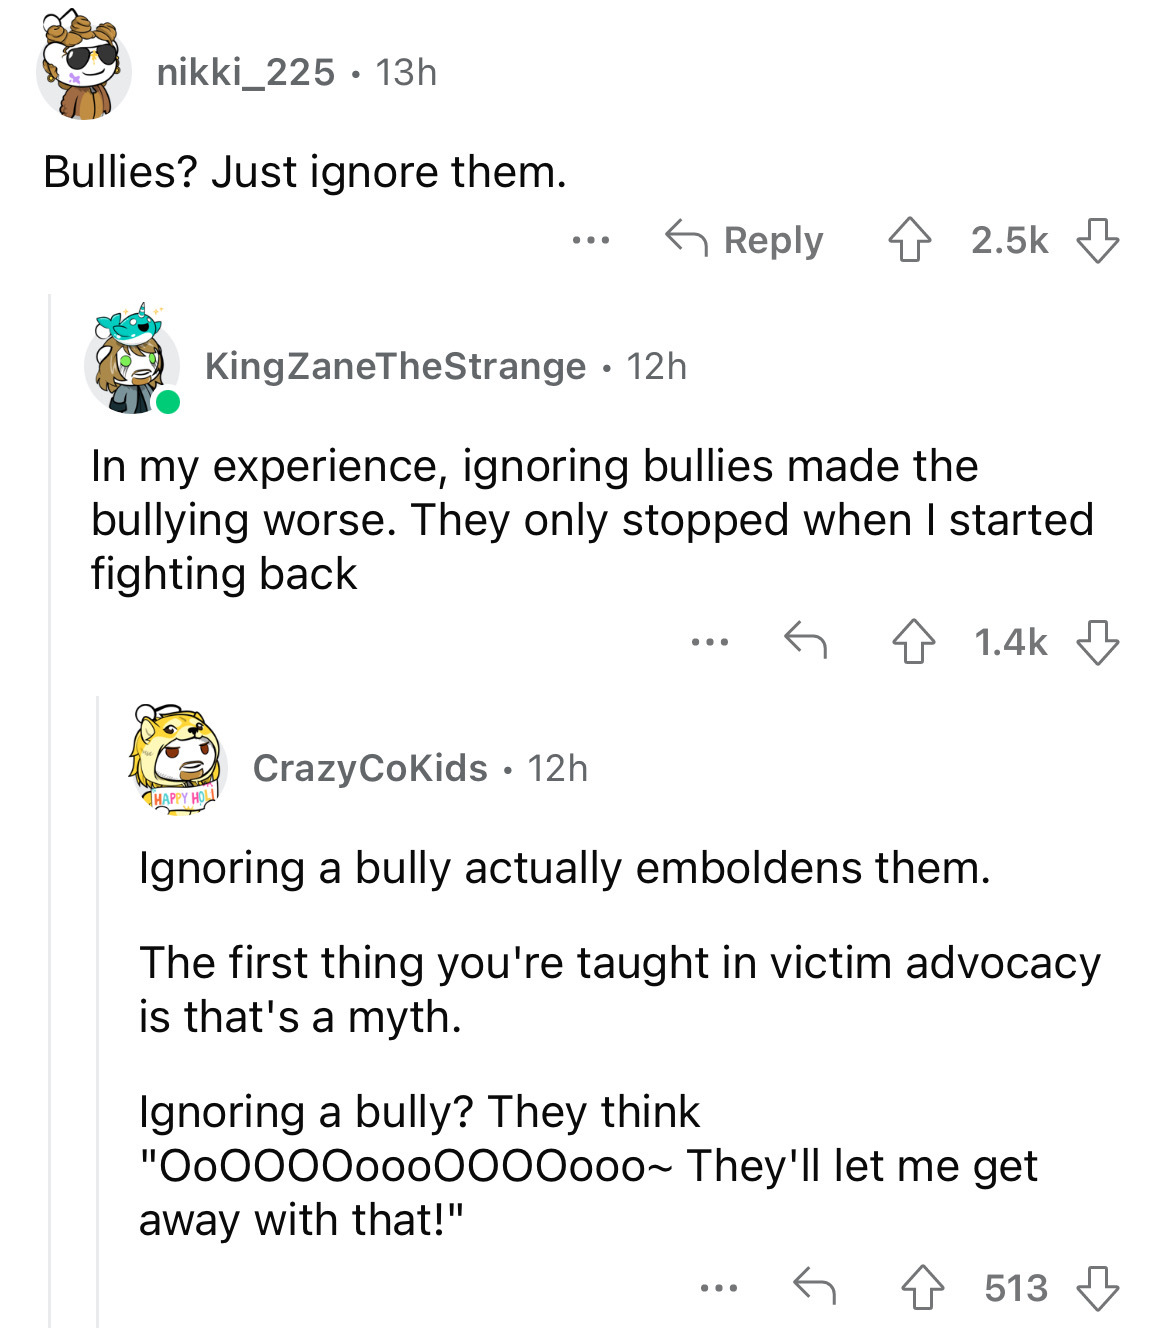 document - nikki_225 13h Bullies? Just ignore them. ... KingZaneTheStrange. 12h In my experience, ignoring bullies made the bullying worse. They only stopped when I started fighting back ... ... Crazy CoKids 12h Ignoring a bully actually emboldens them. T